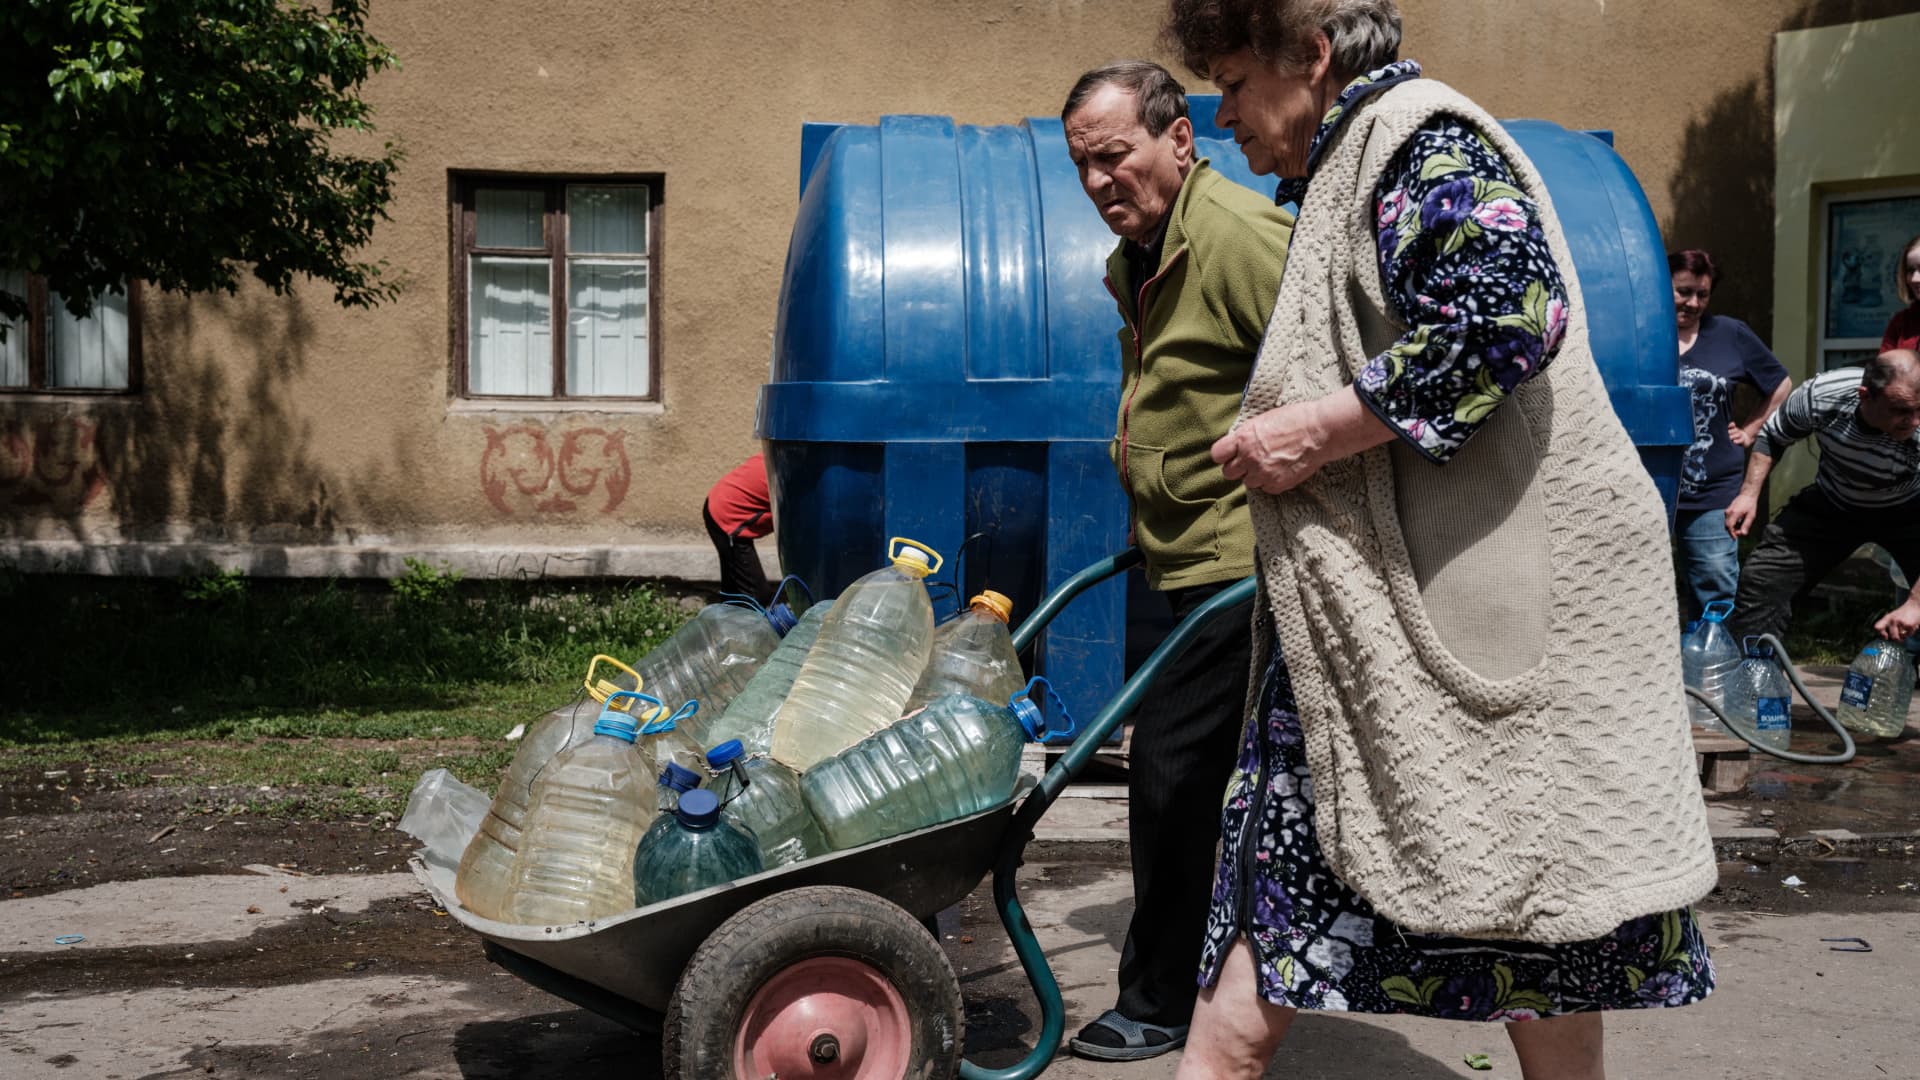 Residents carry water bottles in a wheelbarrow as they make their way from a water supply tank in Toretsk, eastern Ukraine, on May 16, 2022, on the 82nd day of the Russian invasion of Ukraine.